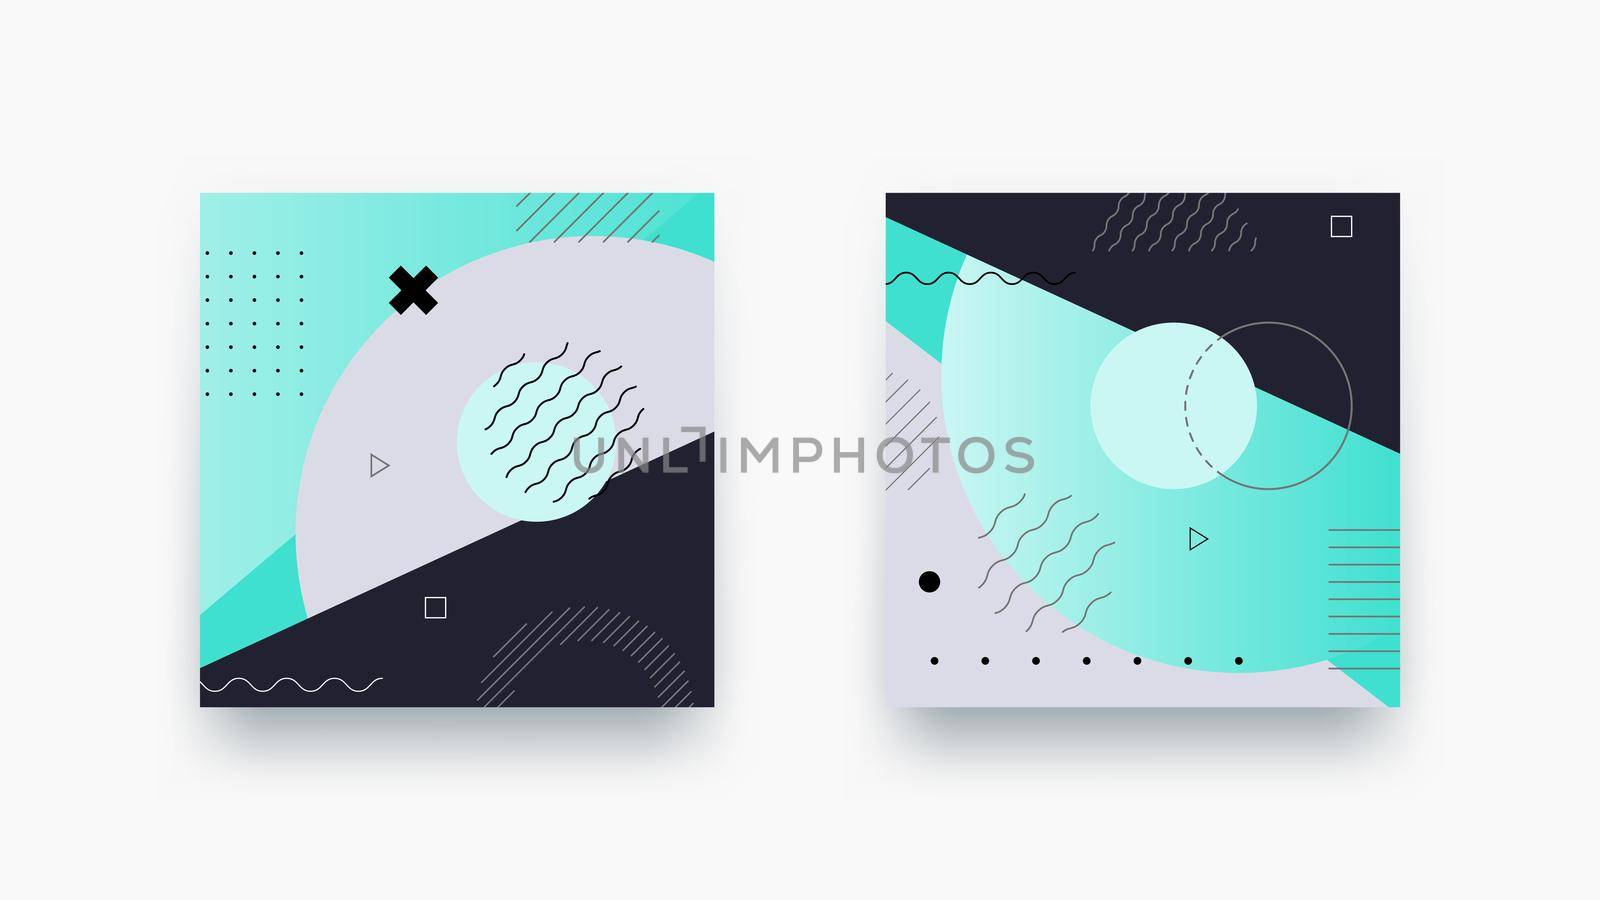 Dark vector geometric backround. Abstract design styled vintage trends 80-s. Minimalistic background by Yarkee